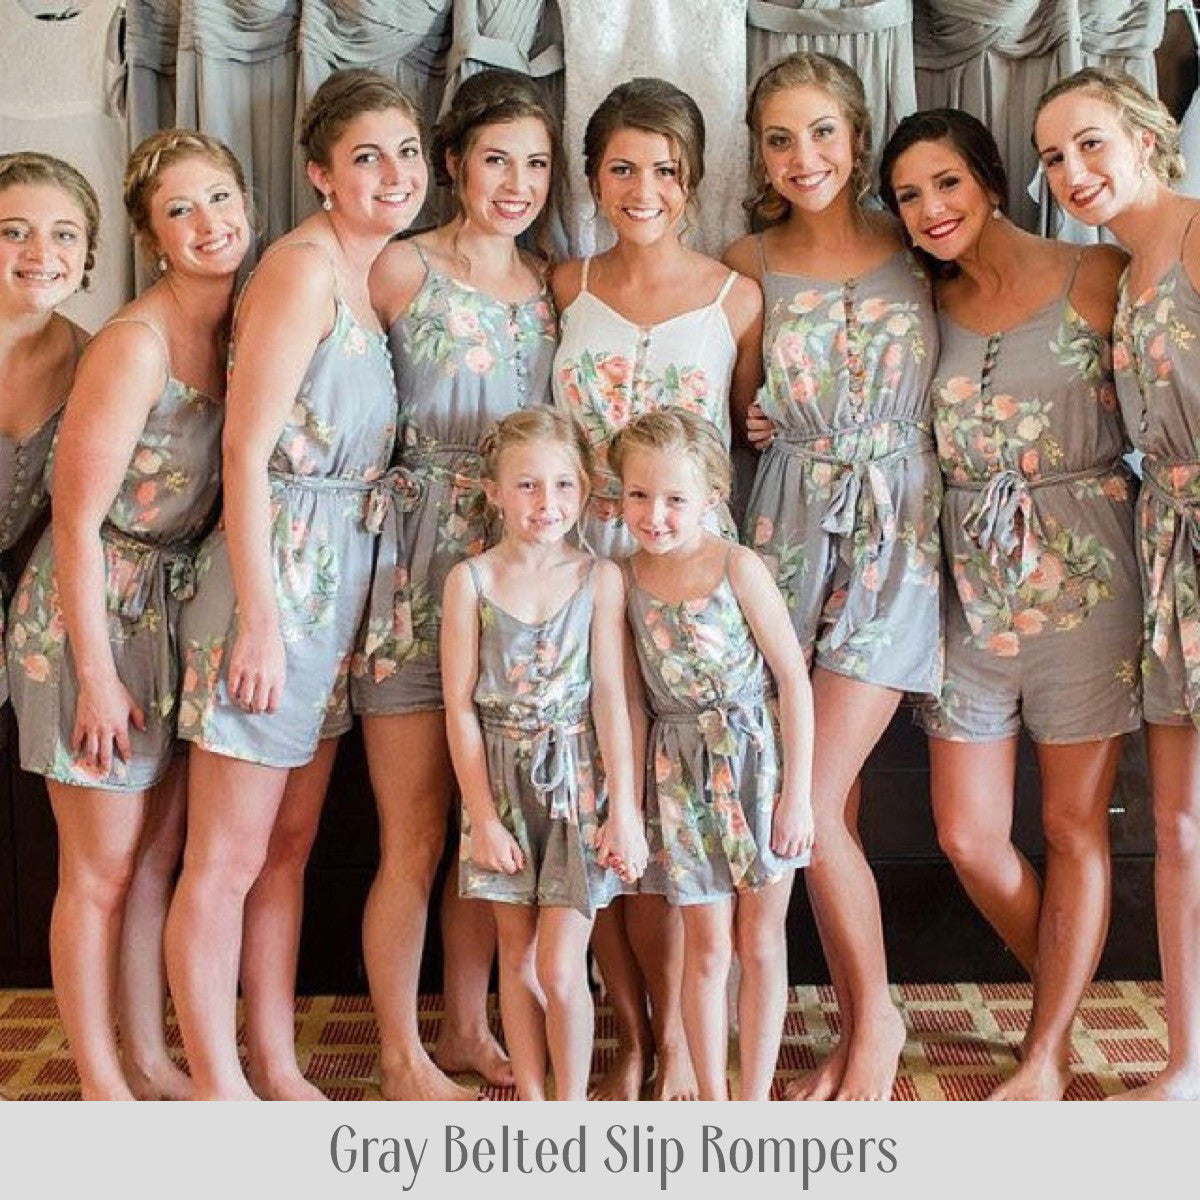 Mismatched Styles Rompers - Copper, Teal and Blush Dreamy Angel Song Bridesmaids Rompers Set